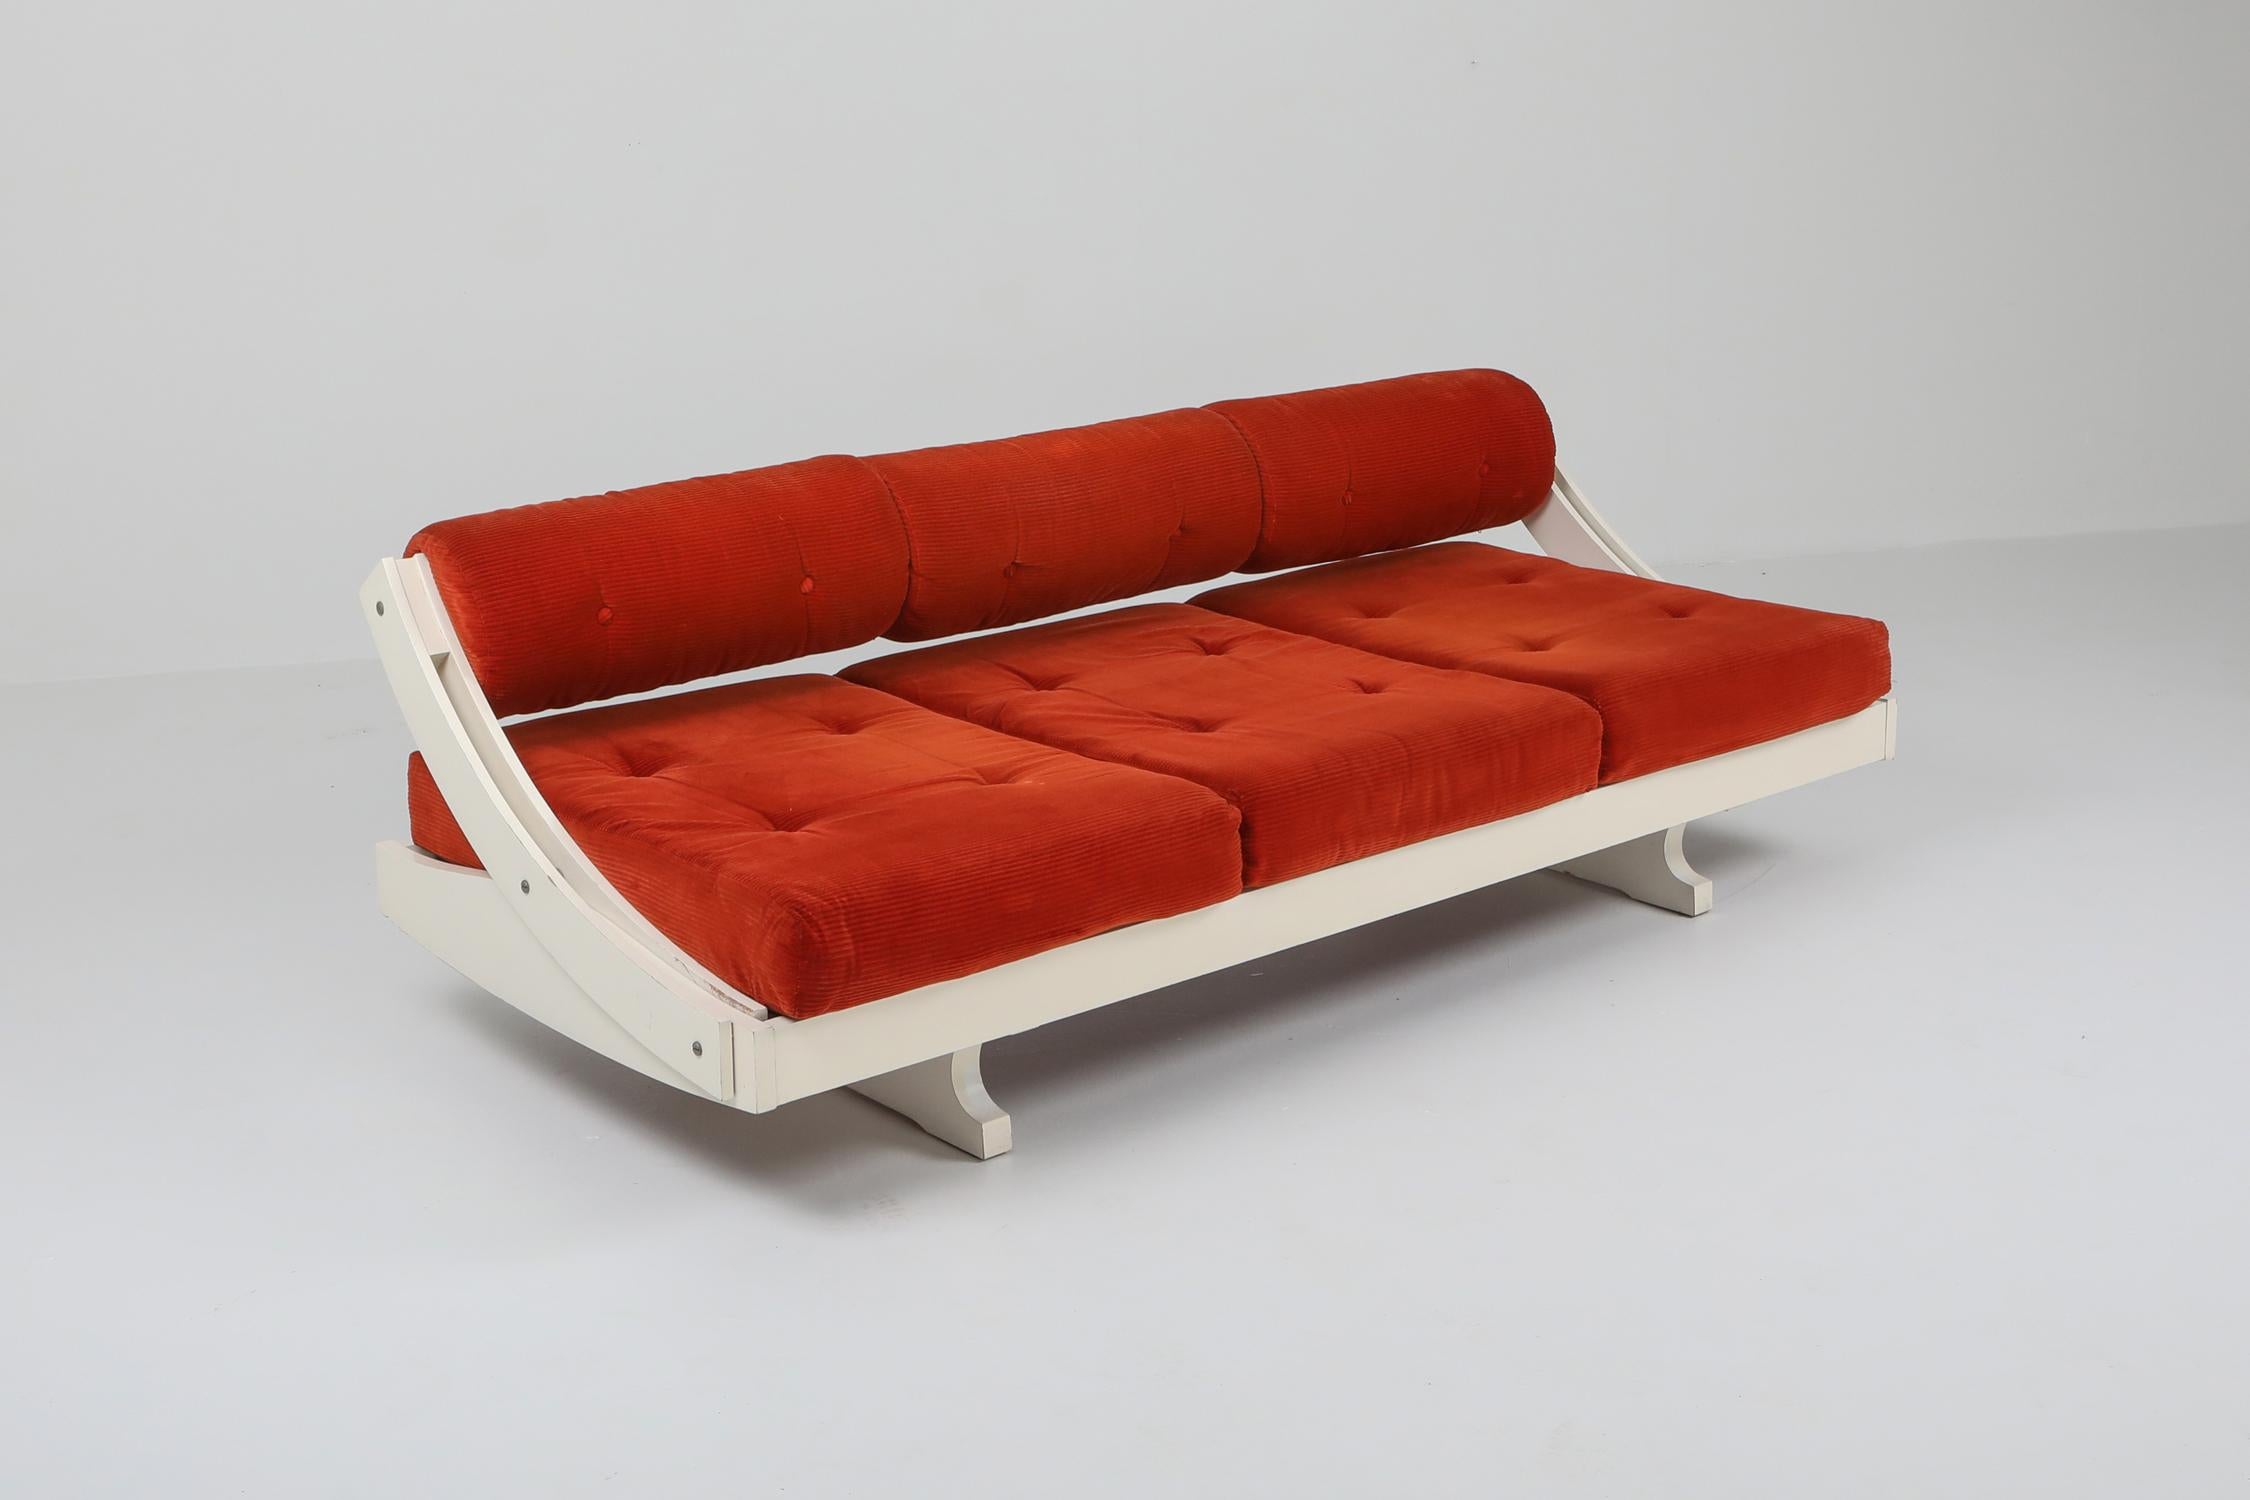 Mid-century modern daybed and sofa model GS195 made by Gianni Songia for Sormani. White lacquered base with red velvet upholstery. The backrest can be adapted to make it a comfortable daybed. Made in Italy, 1963.